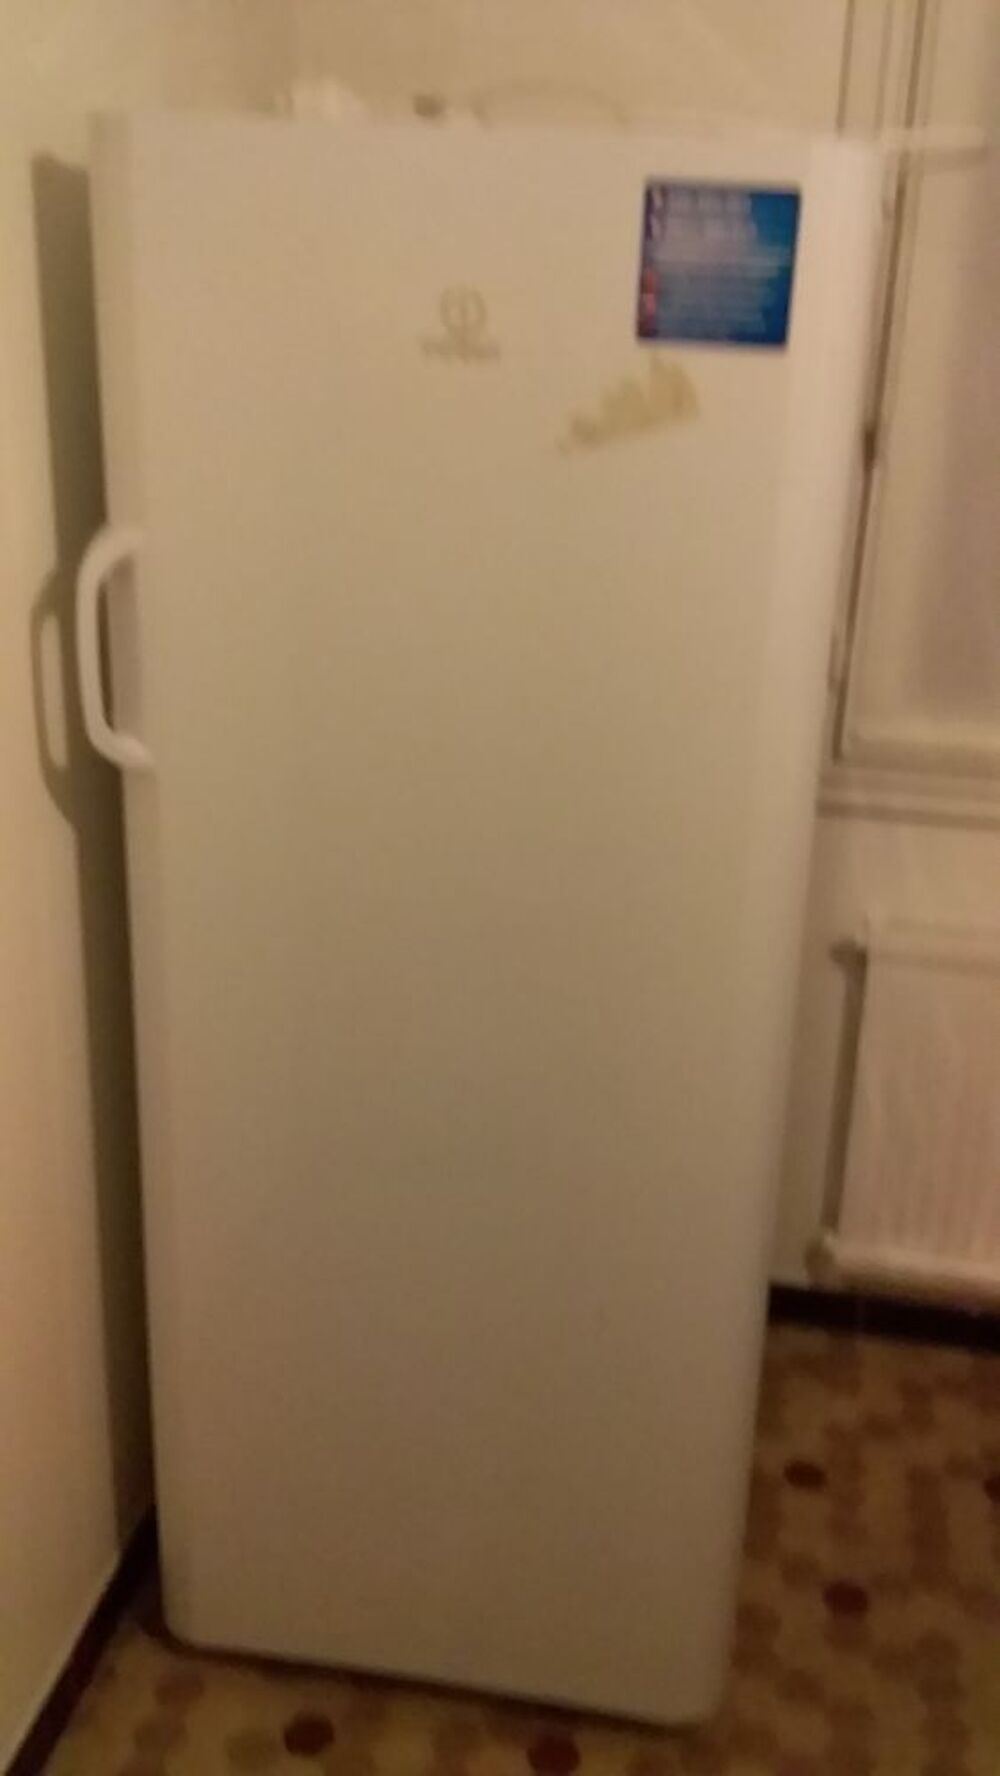 ARMOIRE CONG&eacute;LATEUR &agrave; tiroirs INDESIT Electromnager